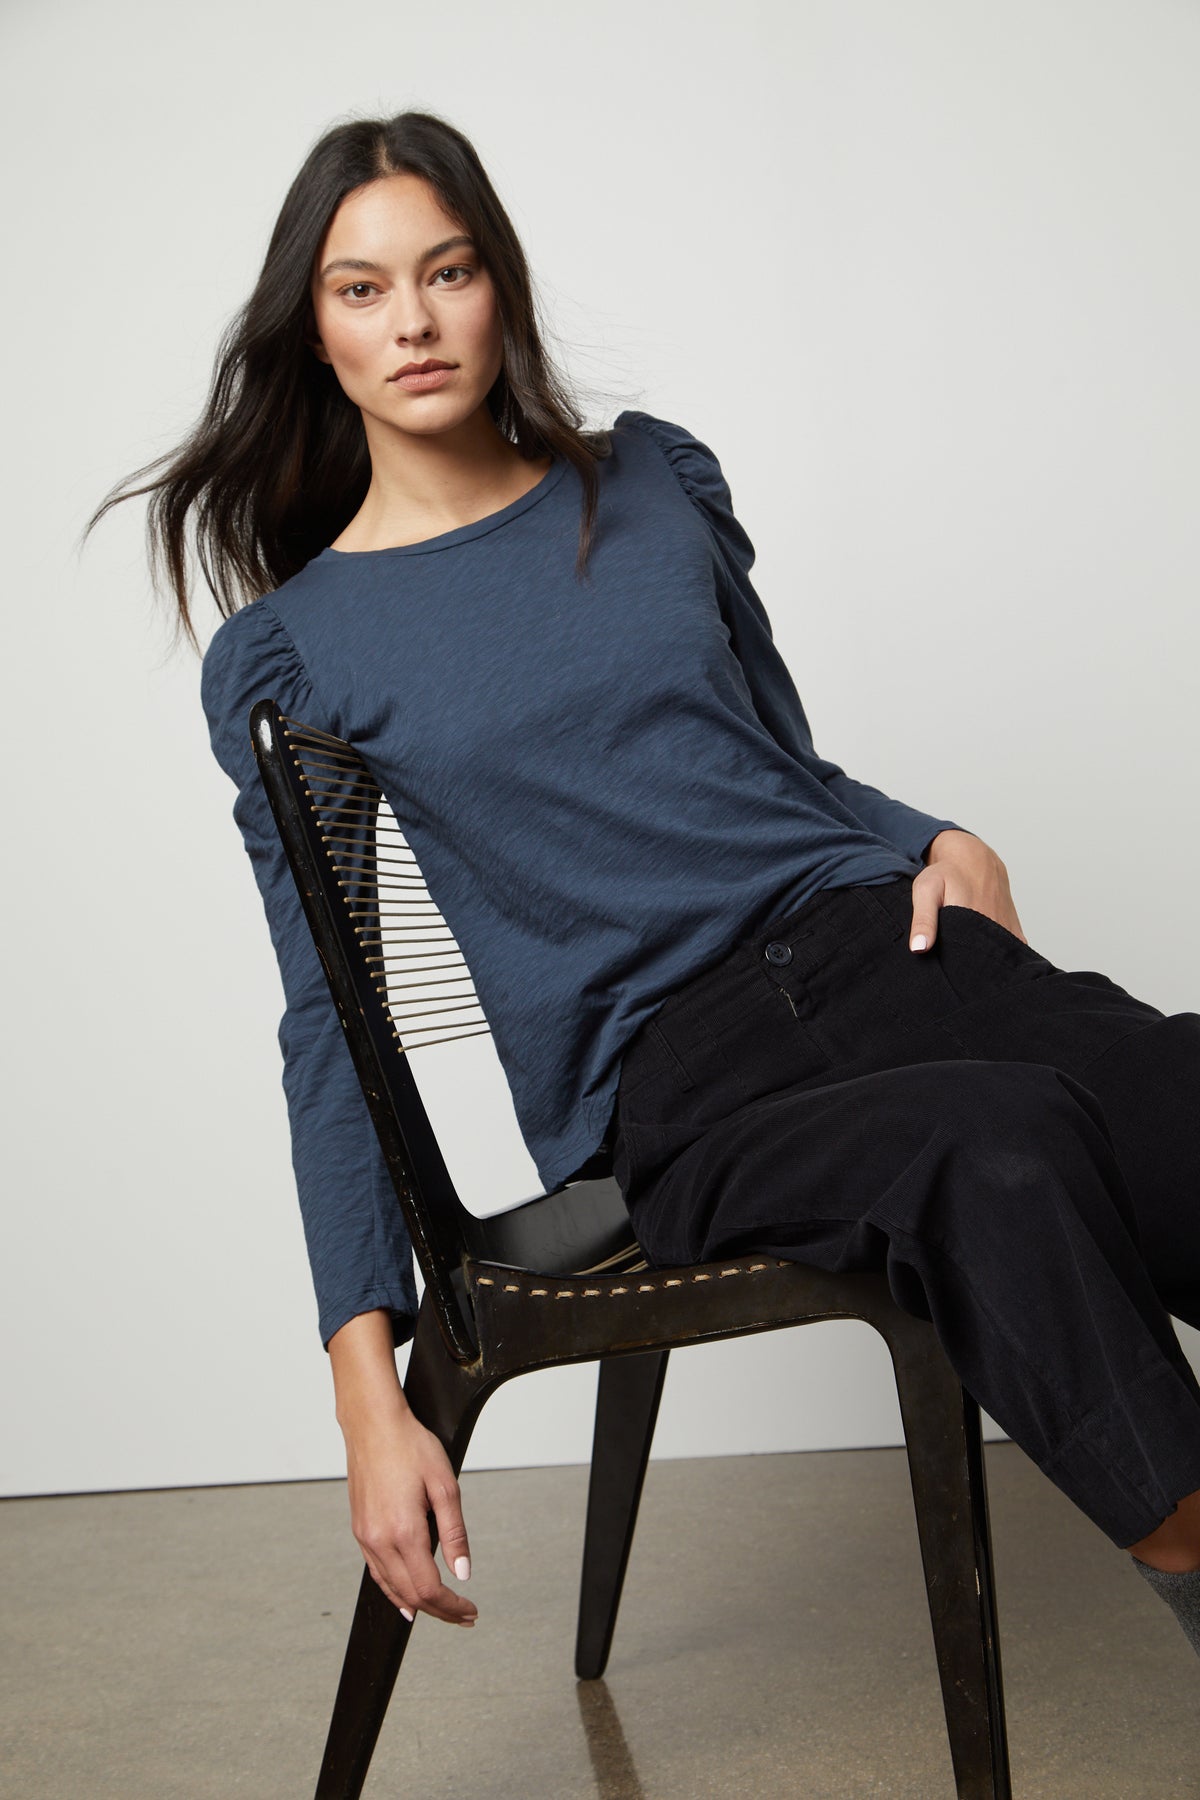 A woman is sitting on a chair wearing a TORA CREW NECK TEE by Velvet by Graham & Spencer, blue top and black pants.-26872376721601